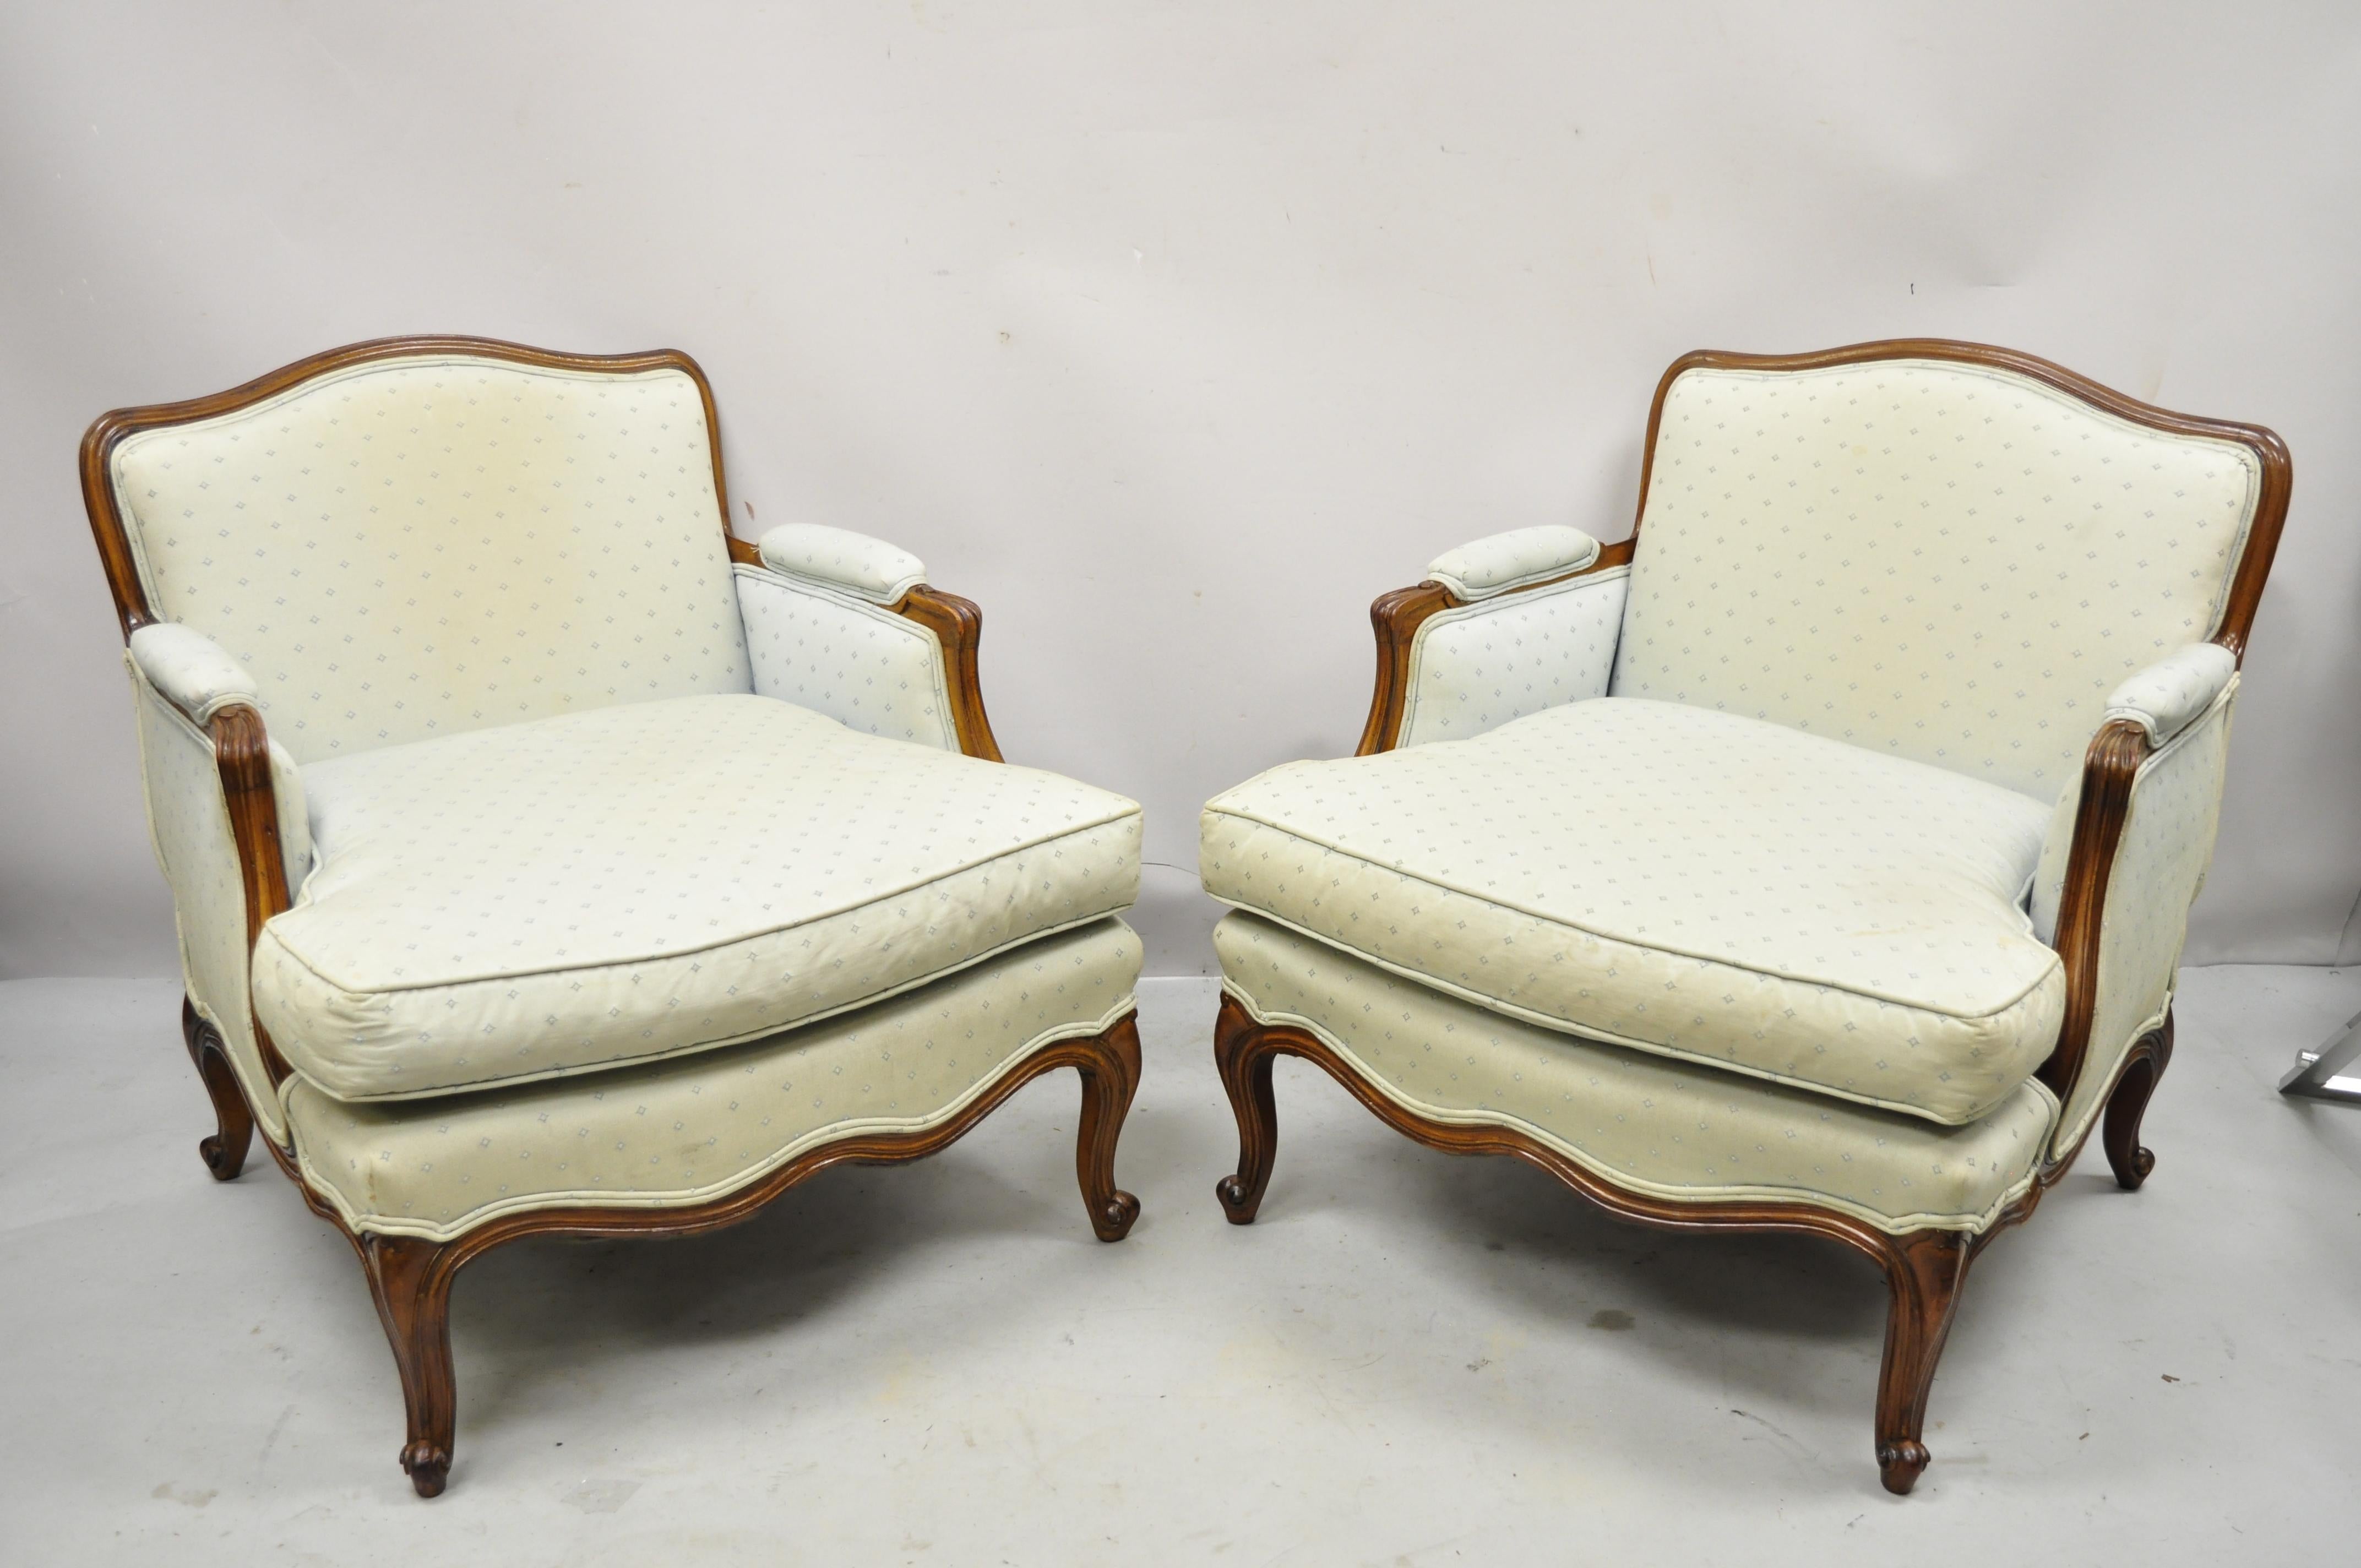 Vintage French Provincial Louis XV style upholstered bergere lounge club chairs and ottoman - 3 Piece Set. Item features (2) lounge chairs, (1) ottoman, solid wood frames, beautiful wood grain, upholstered armrests, distressed finish, nicely carved